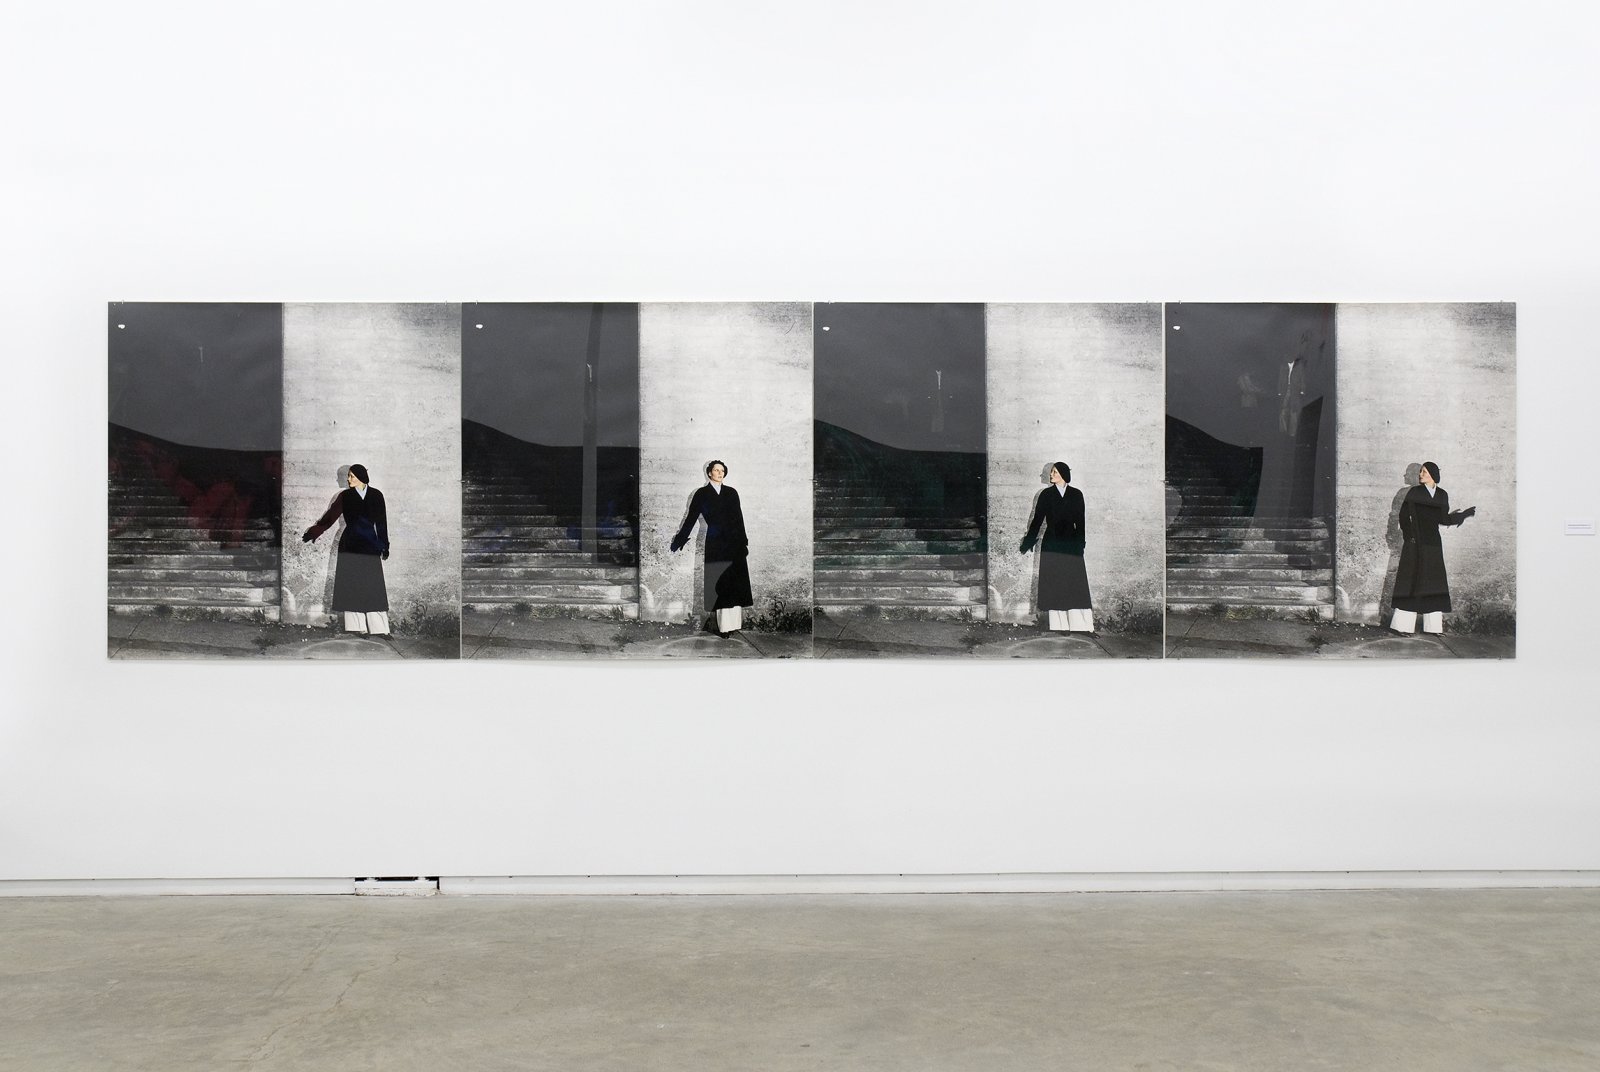 Ian Wallace, Hypnerotomachia (the Staircase), 1977, 4 hand-coloured black and white photographs, 48 x 192 in. (122 x 488 cm)